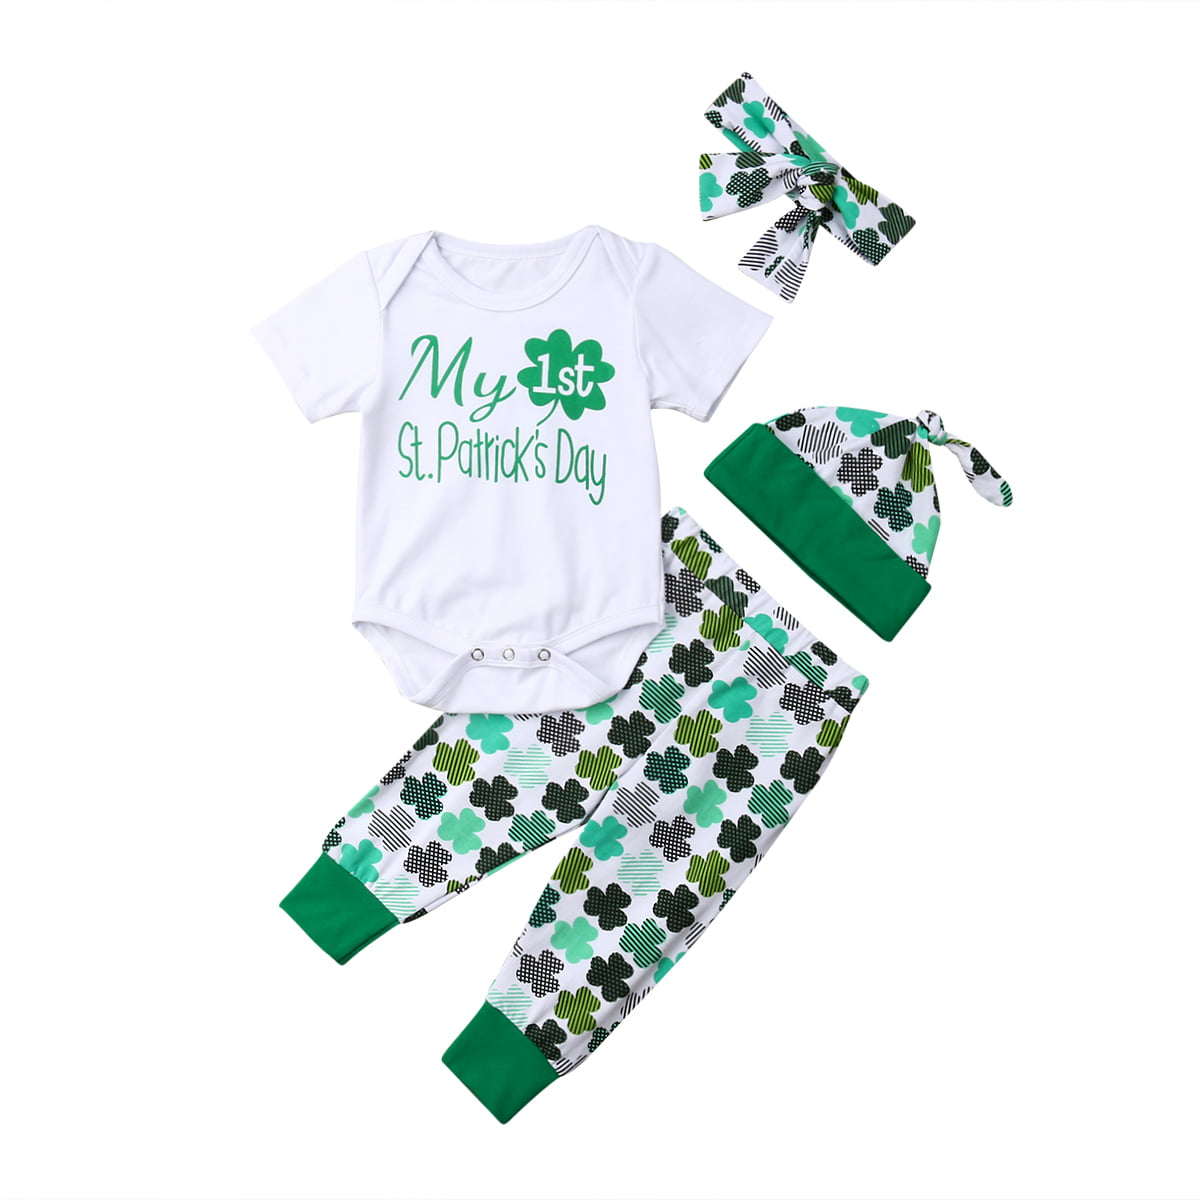 CARTER'S NEWBORN LET THE SHENANIGANS BEGIN ST PATRICK'S DAY OUTFIT NEW #13782 